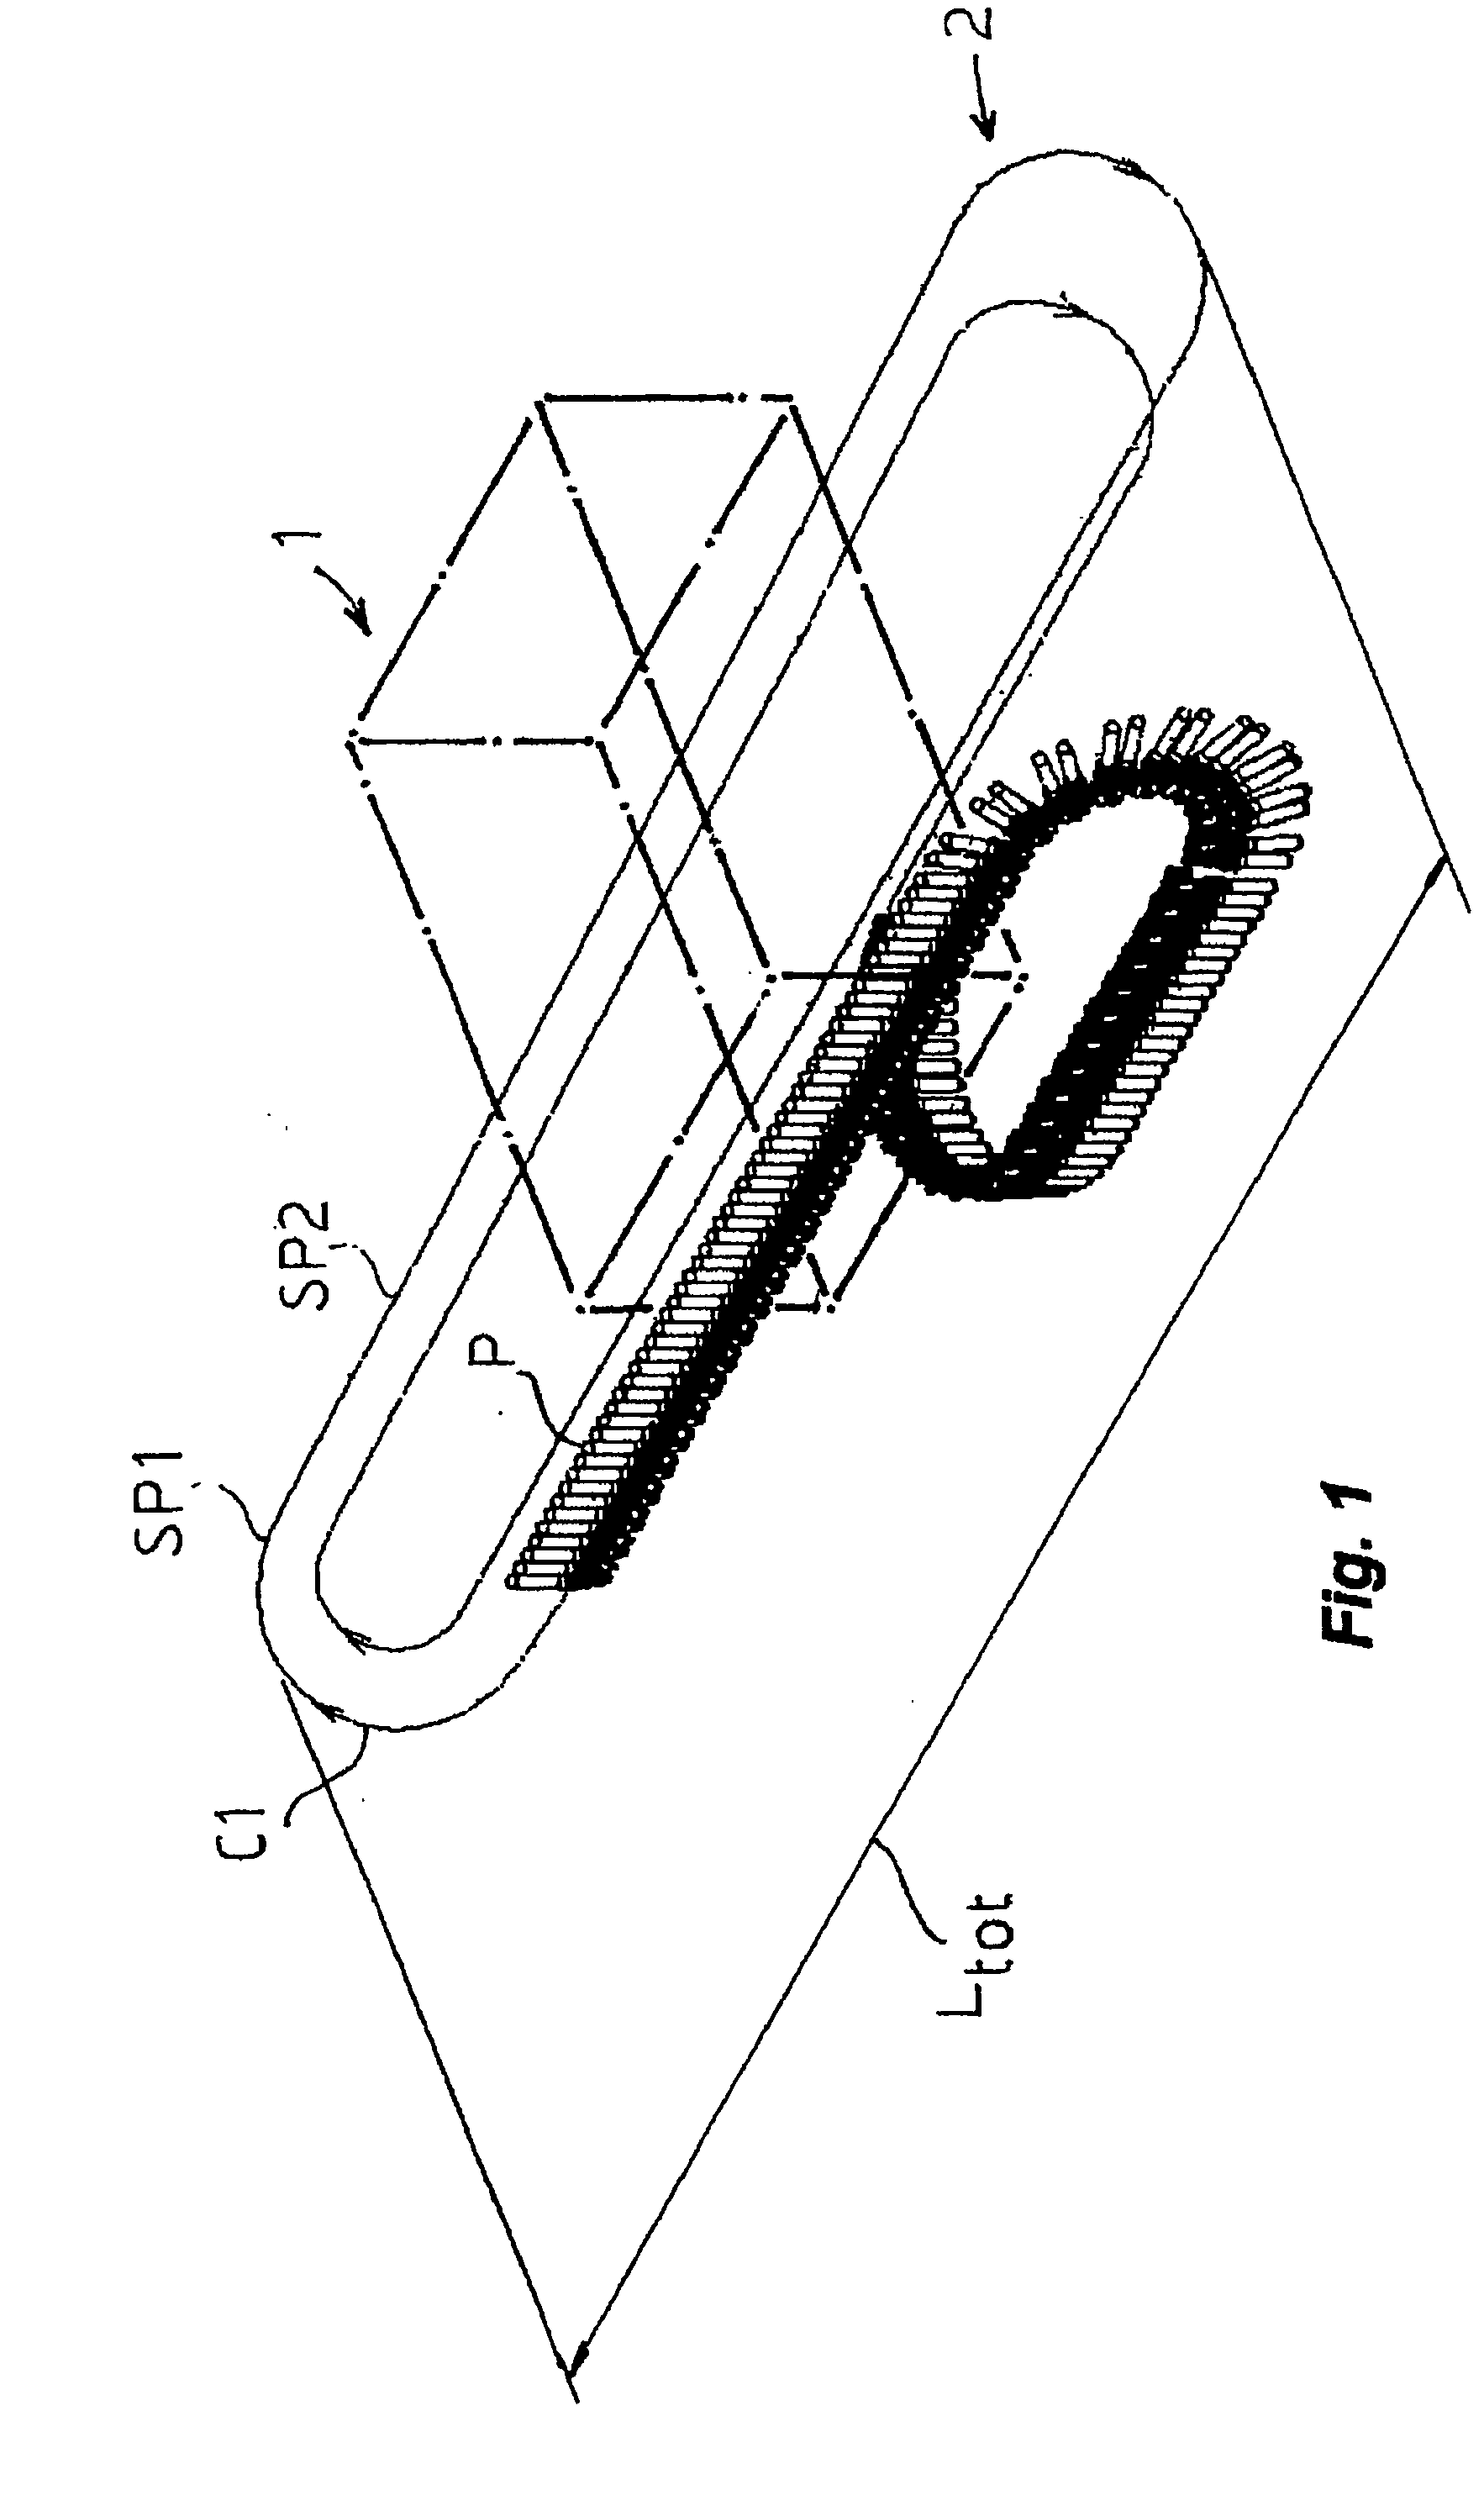 Plant and Method for Thermally Conditioning Plastic Items